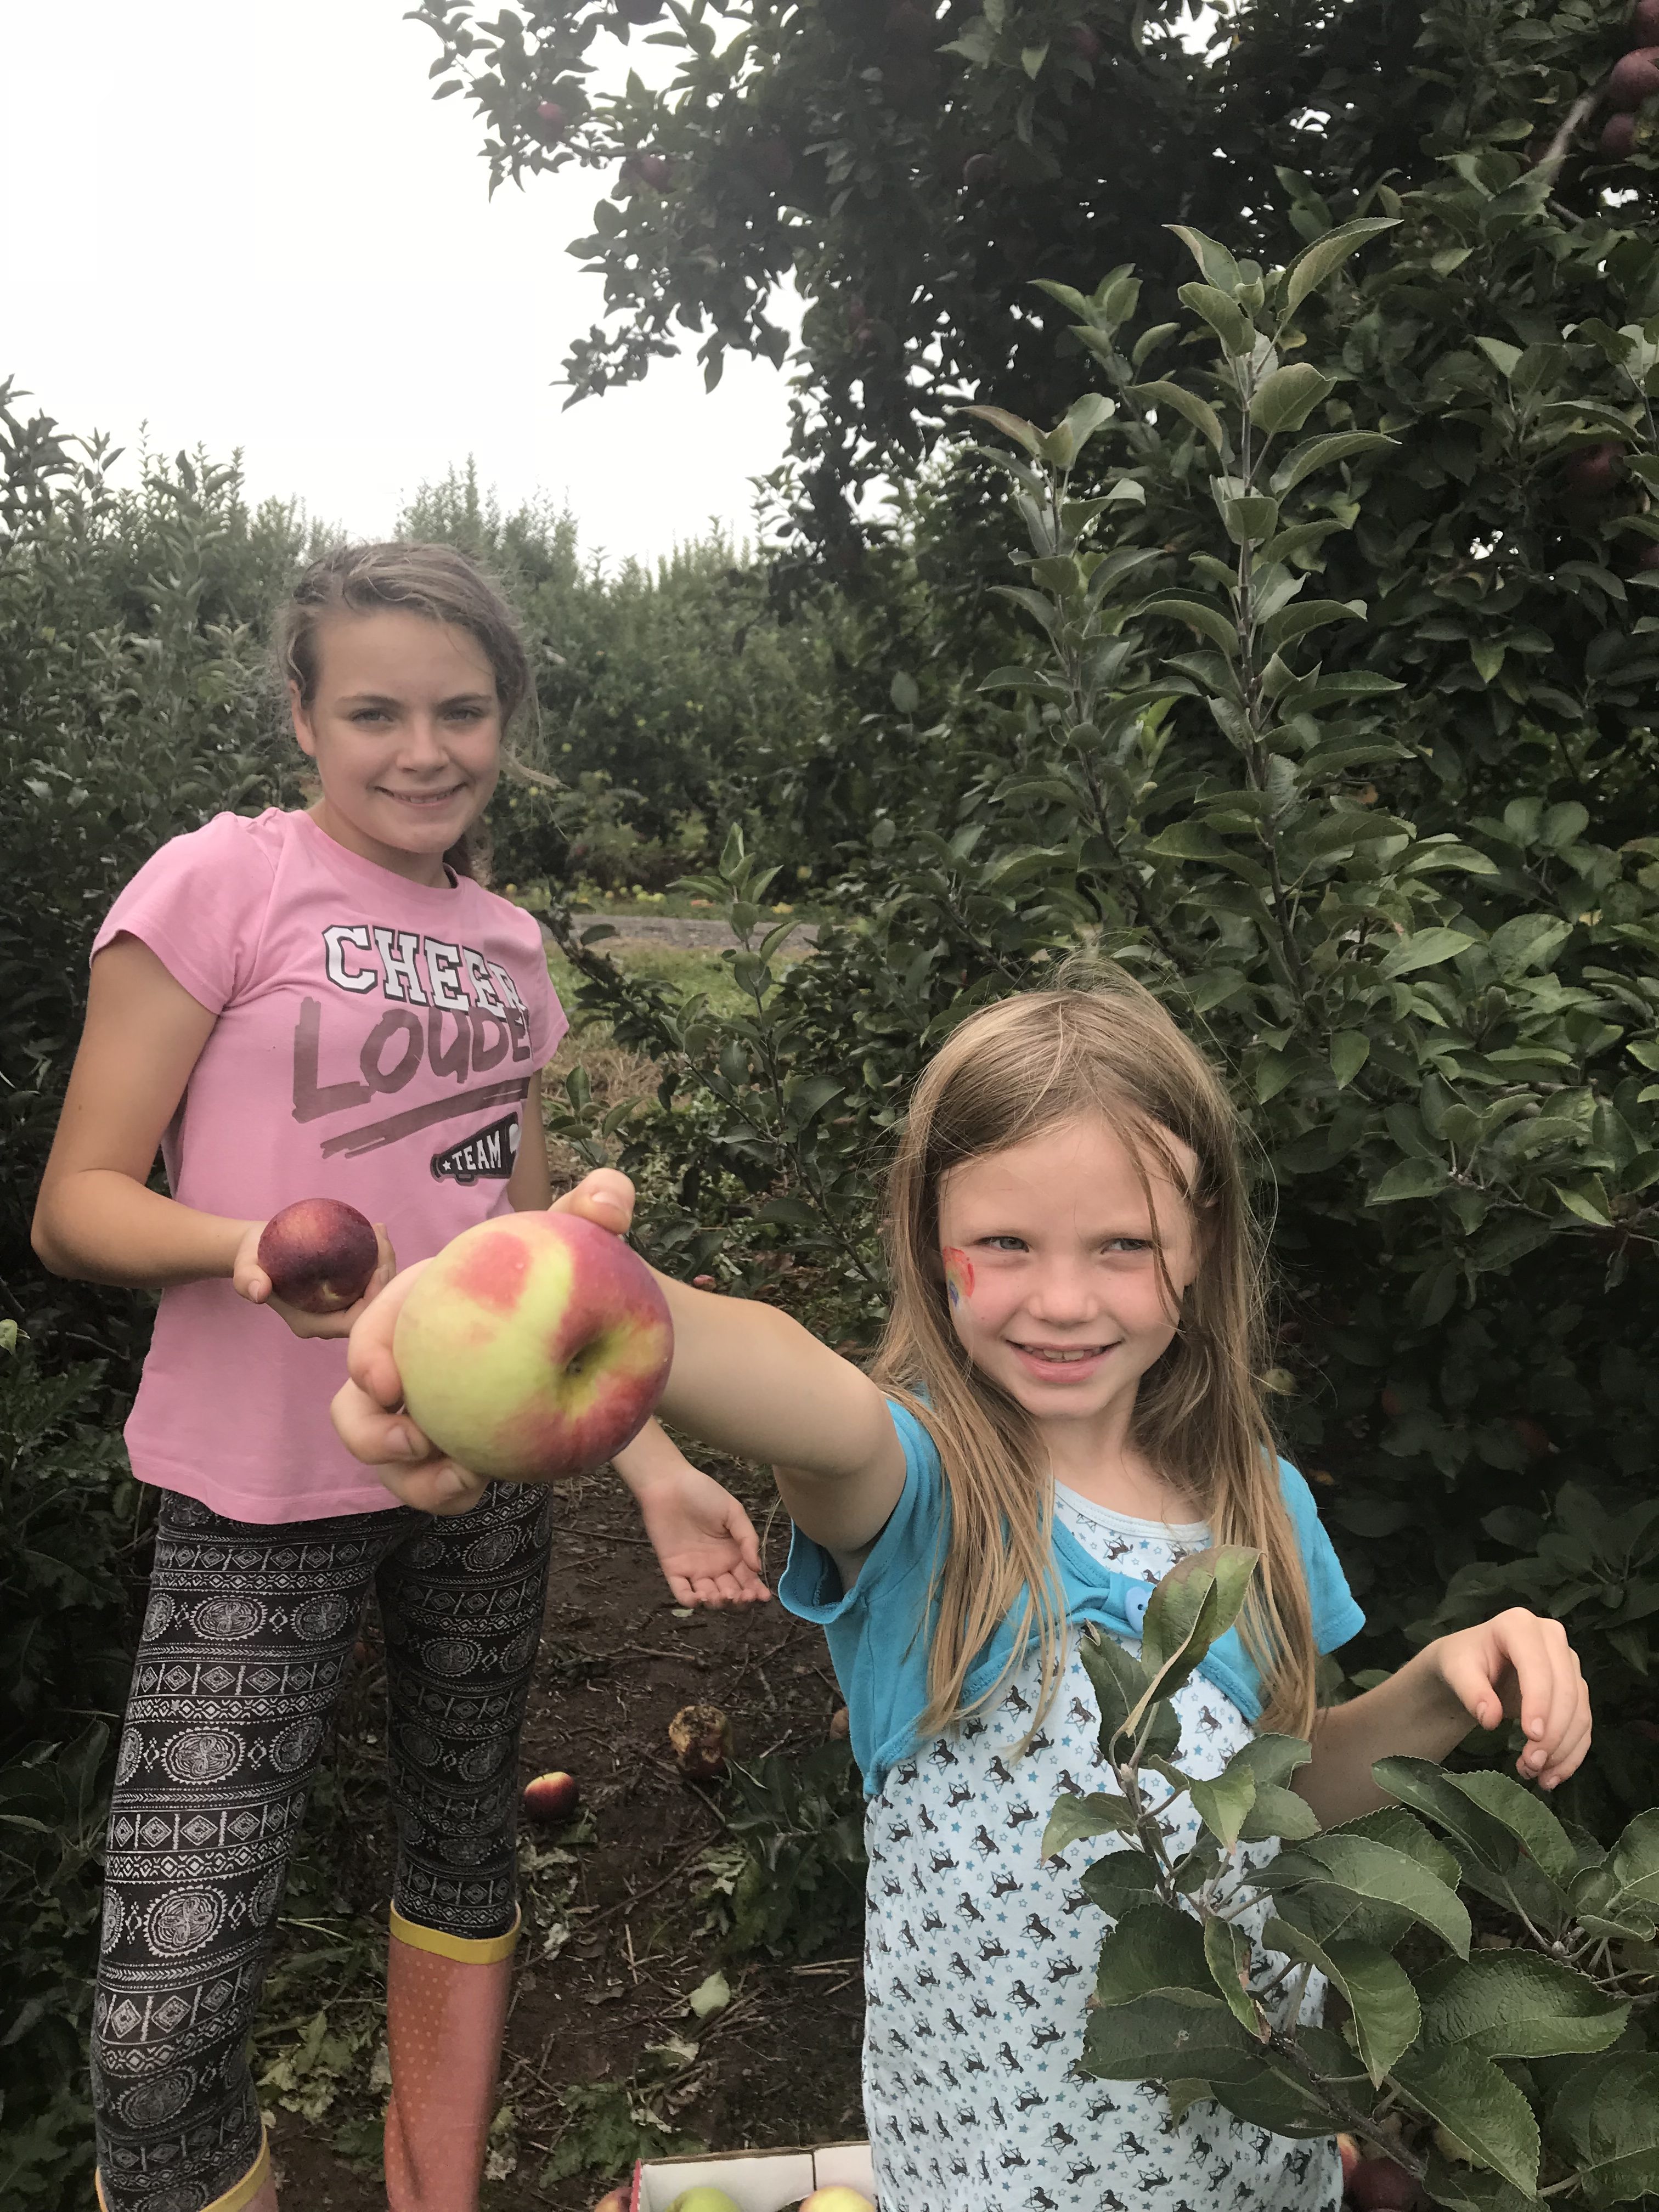 Fall is a great time to go apple picking and make some delicious apple recipes. Get the kids involved in making these apple recipes.